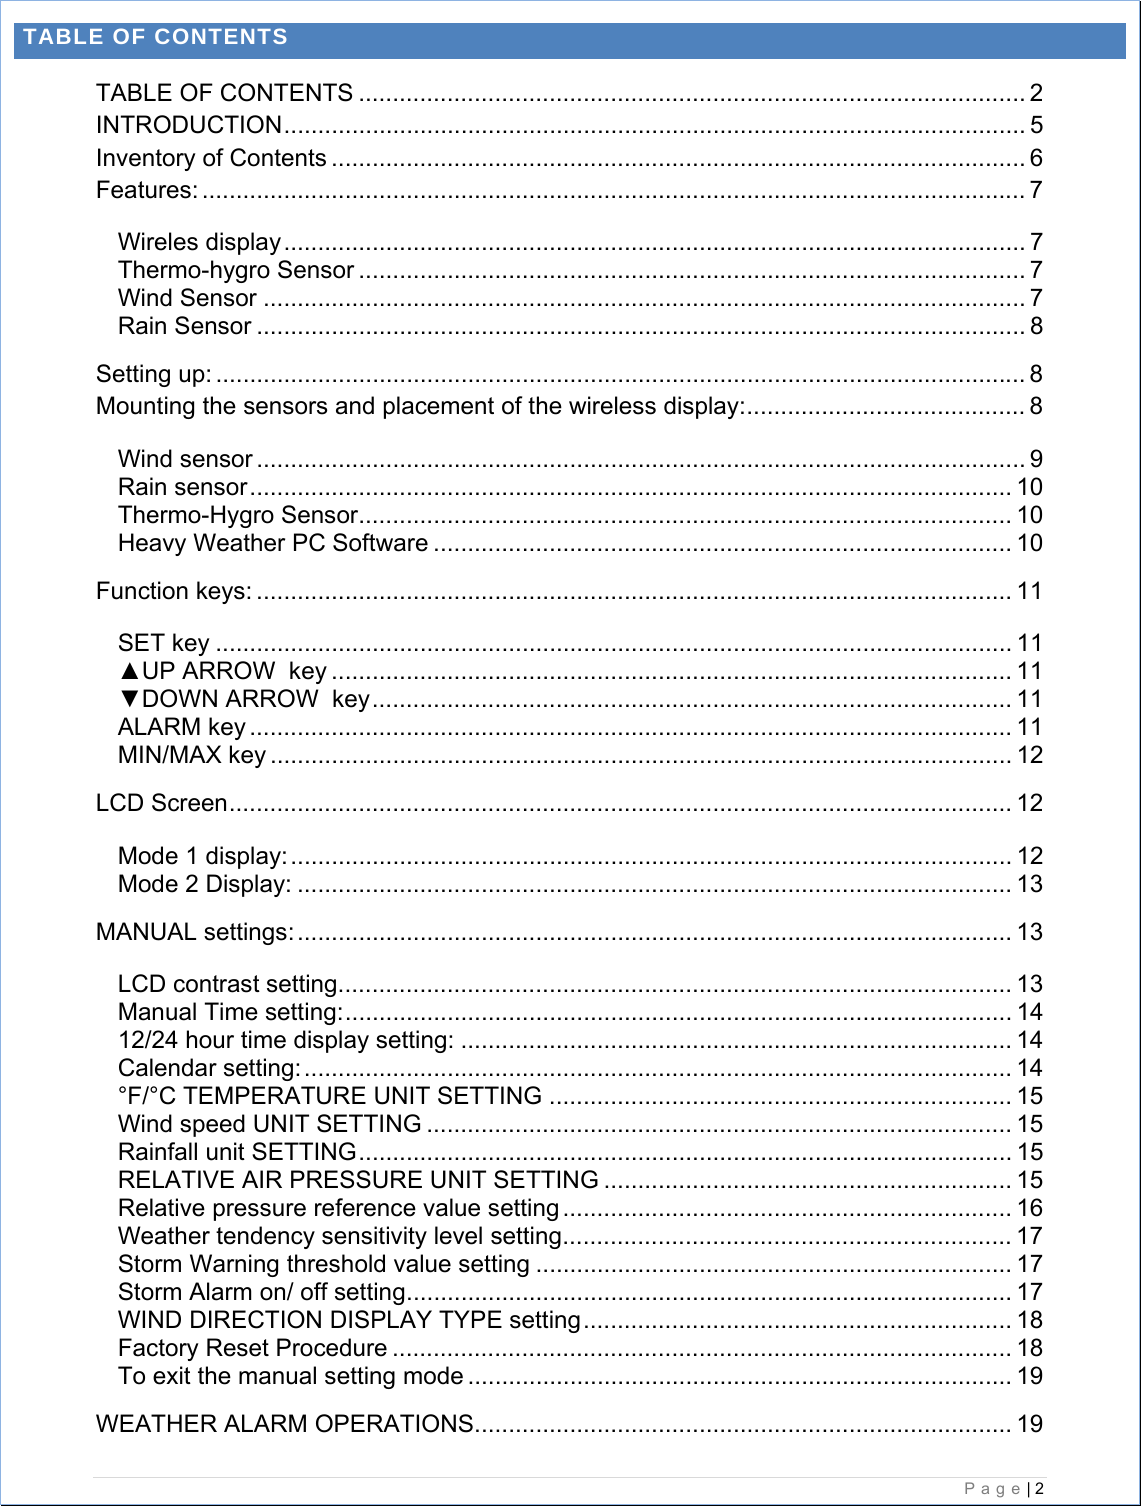    Page| 2  TABLE OF CONTENTS TABLE OF CONTENTS .................................................................................................. 2 INTRODUCTION............................................................................................................. 5 Inventory of Contents ...................................................................................................... 6 Features: ......................................................................................................................... 7 Wireles display............................................................................................................. 7 Thermo-hygro Sensor .................................................................................................. 7 Wind Sensor ................................................................................................................ 7 Rain Sensor ................................................................................................................. 8 Setting up: ....................................................................................................................... 8 Mounting the sensors and placement of the wireless display:......................................... 8 Wind sensor ................................................................................................................. 9 Rain sensor................................................................................................................ 10 Thermo-Hygro Sensor................................................................................................ 10 Heavy Weather PC Software ..................................................................................... 10 Function keys: ............................................................................................................... 11 SET key ..................................................................................................................... 11 ▲UP ARROW  key .................................................................................................... 11 ▼DOWN ARROW  key.............................................................................................. 11 ALARM key ................................................................................................................ 11 MIN/MAX key ............................................................................................................. 12 LCD Screen................................................................................................................... 12 Mode 1 display:.......................................................................................................... 12 Mode 2 Display: ......................................................................................................... 13 MANUAL settings:......................................................................................................... 13 LCD contrast setting................................................................................................... 13 Manual Time setting:.................................................................................................. 14 12/24 hour time display setting: ................................................................................. 14 Calendar setting:........................................................................................................ 14 °F/°C TEMPERATURE UNIT SETTING .................................................................... 15 Wind speed UNIT SETTING ...................................................................................... 15 Rainfall unit SETTING................................................................................................ 15 RELATIVE AIR PRESSURE UNIT SETTING ............................................................ 15 Relative pressure reference value setting .................................................................. 16 Weather tendency sensitivity level setting.................................................................. 17 Storm Warning threshold value setting ...................................................................... 17 Storm Alarm on/ off setting......................................................................................... 17 WIND DIRECTION DISPLAY TYPE setting............................................................... 18 Factory Reset Procedure ........................................................................................... 18 To exit the manual setting mode ................................................................................ 19 WEATHER ALARM OPERATIONS............................................................................... 19 